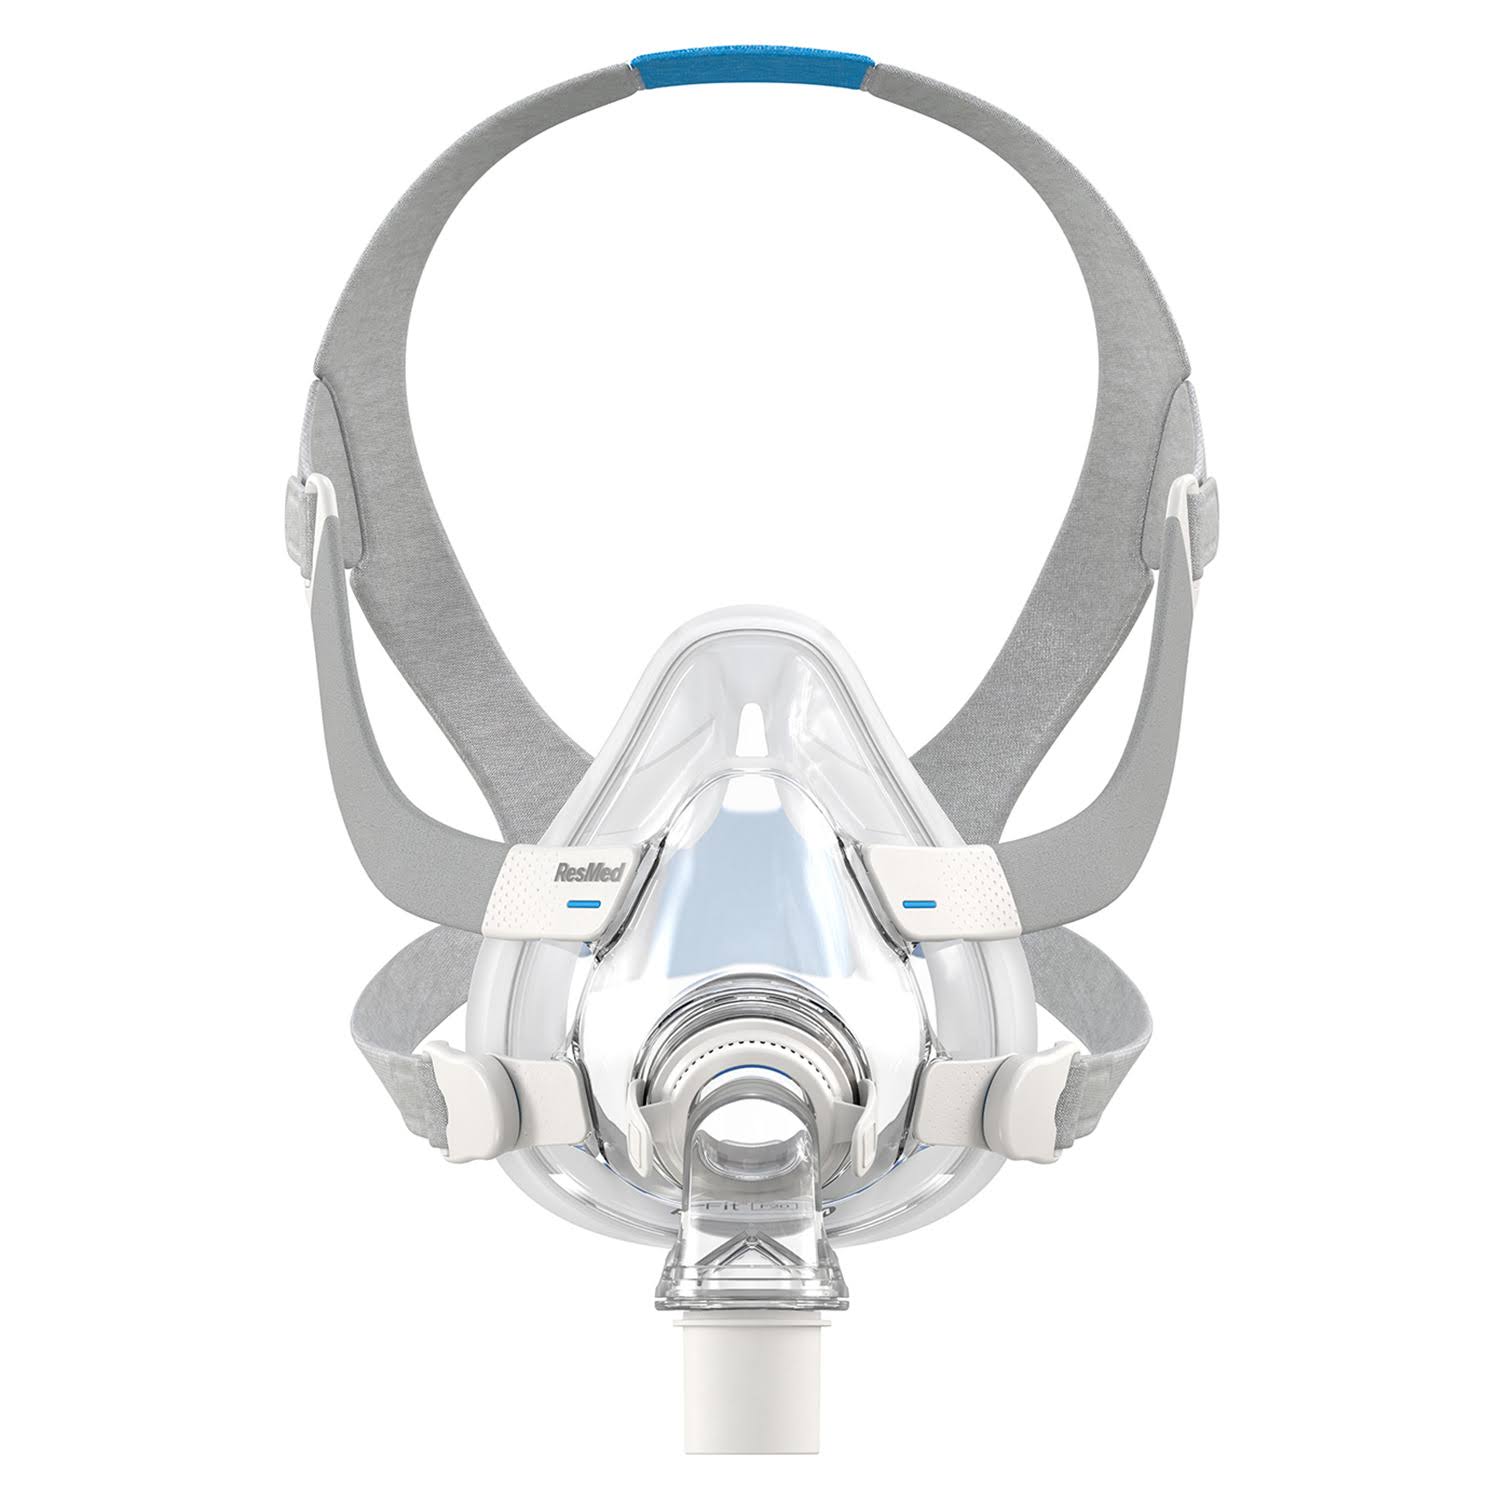 ResMed Airfit F20 Full Face CPAP Mask and Headgear Kit - All Sizes